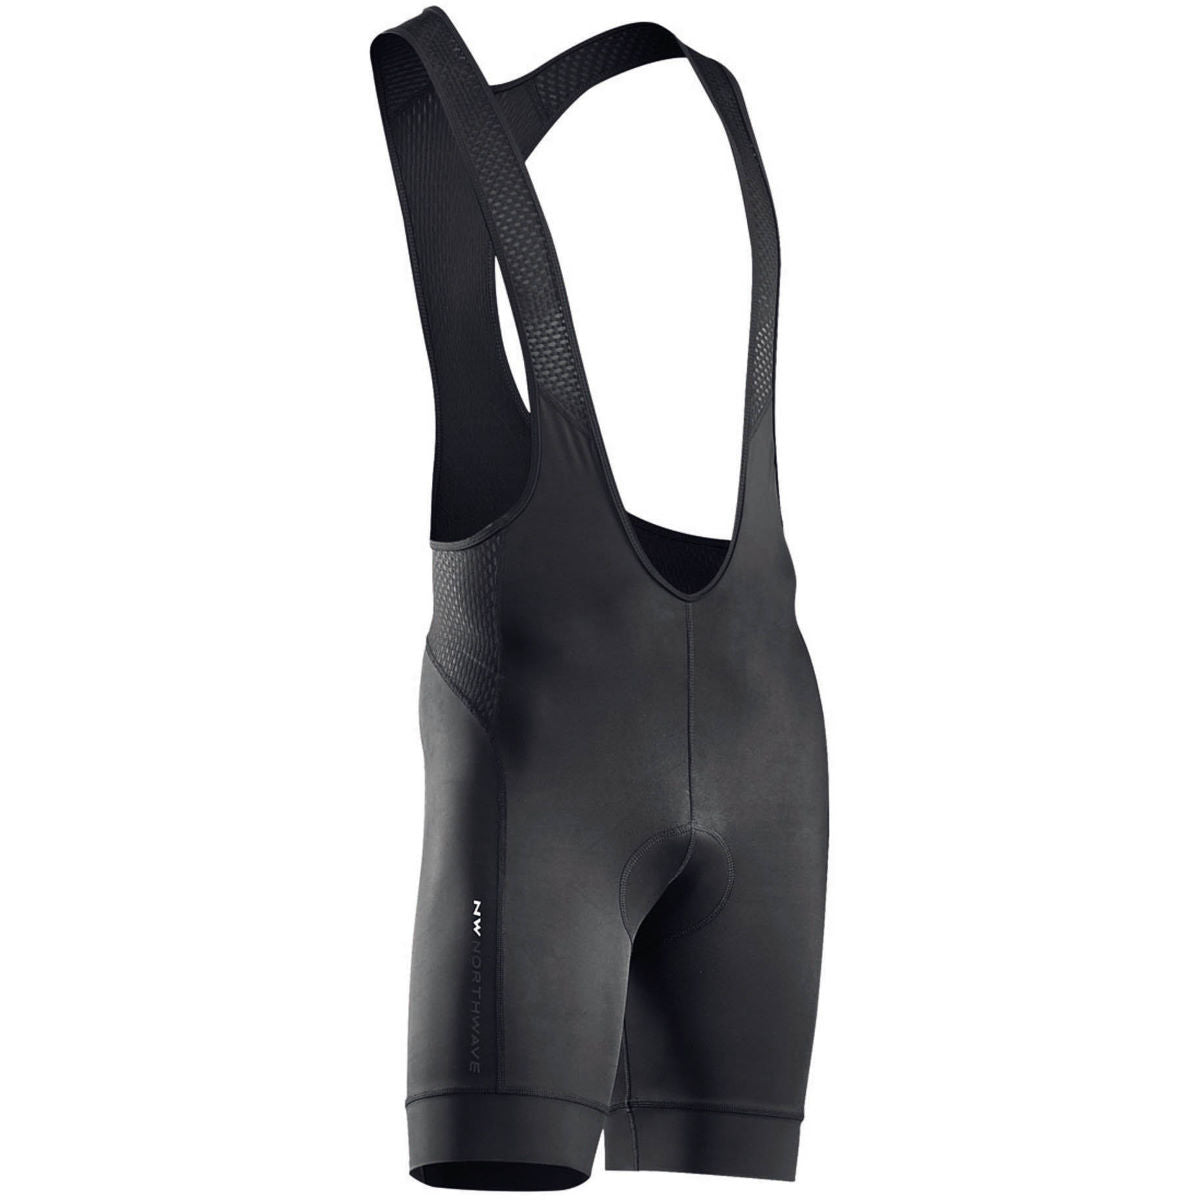 Northwave Force 2 Bibshorts-Bicycle Shorts & Briefs-Northwave-XL-Black-Chain Driven Cycles-Bike Shop-Ireland